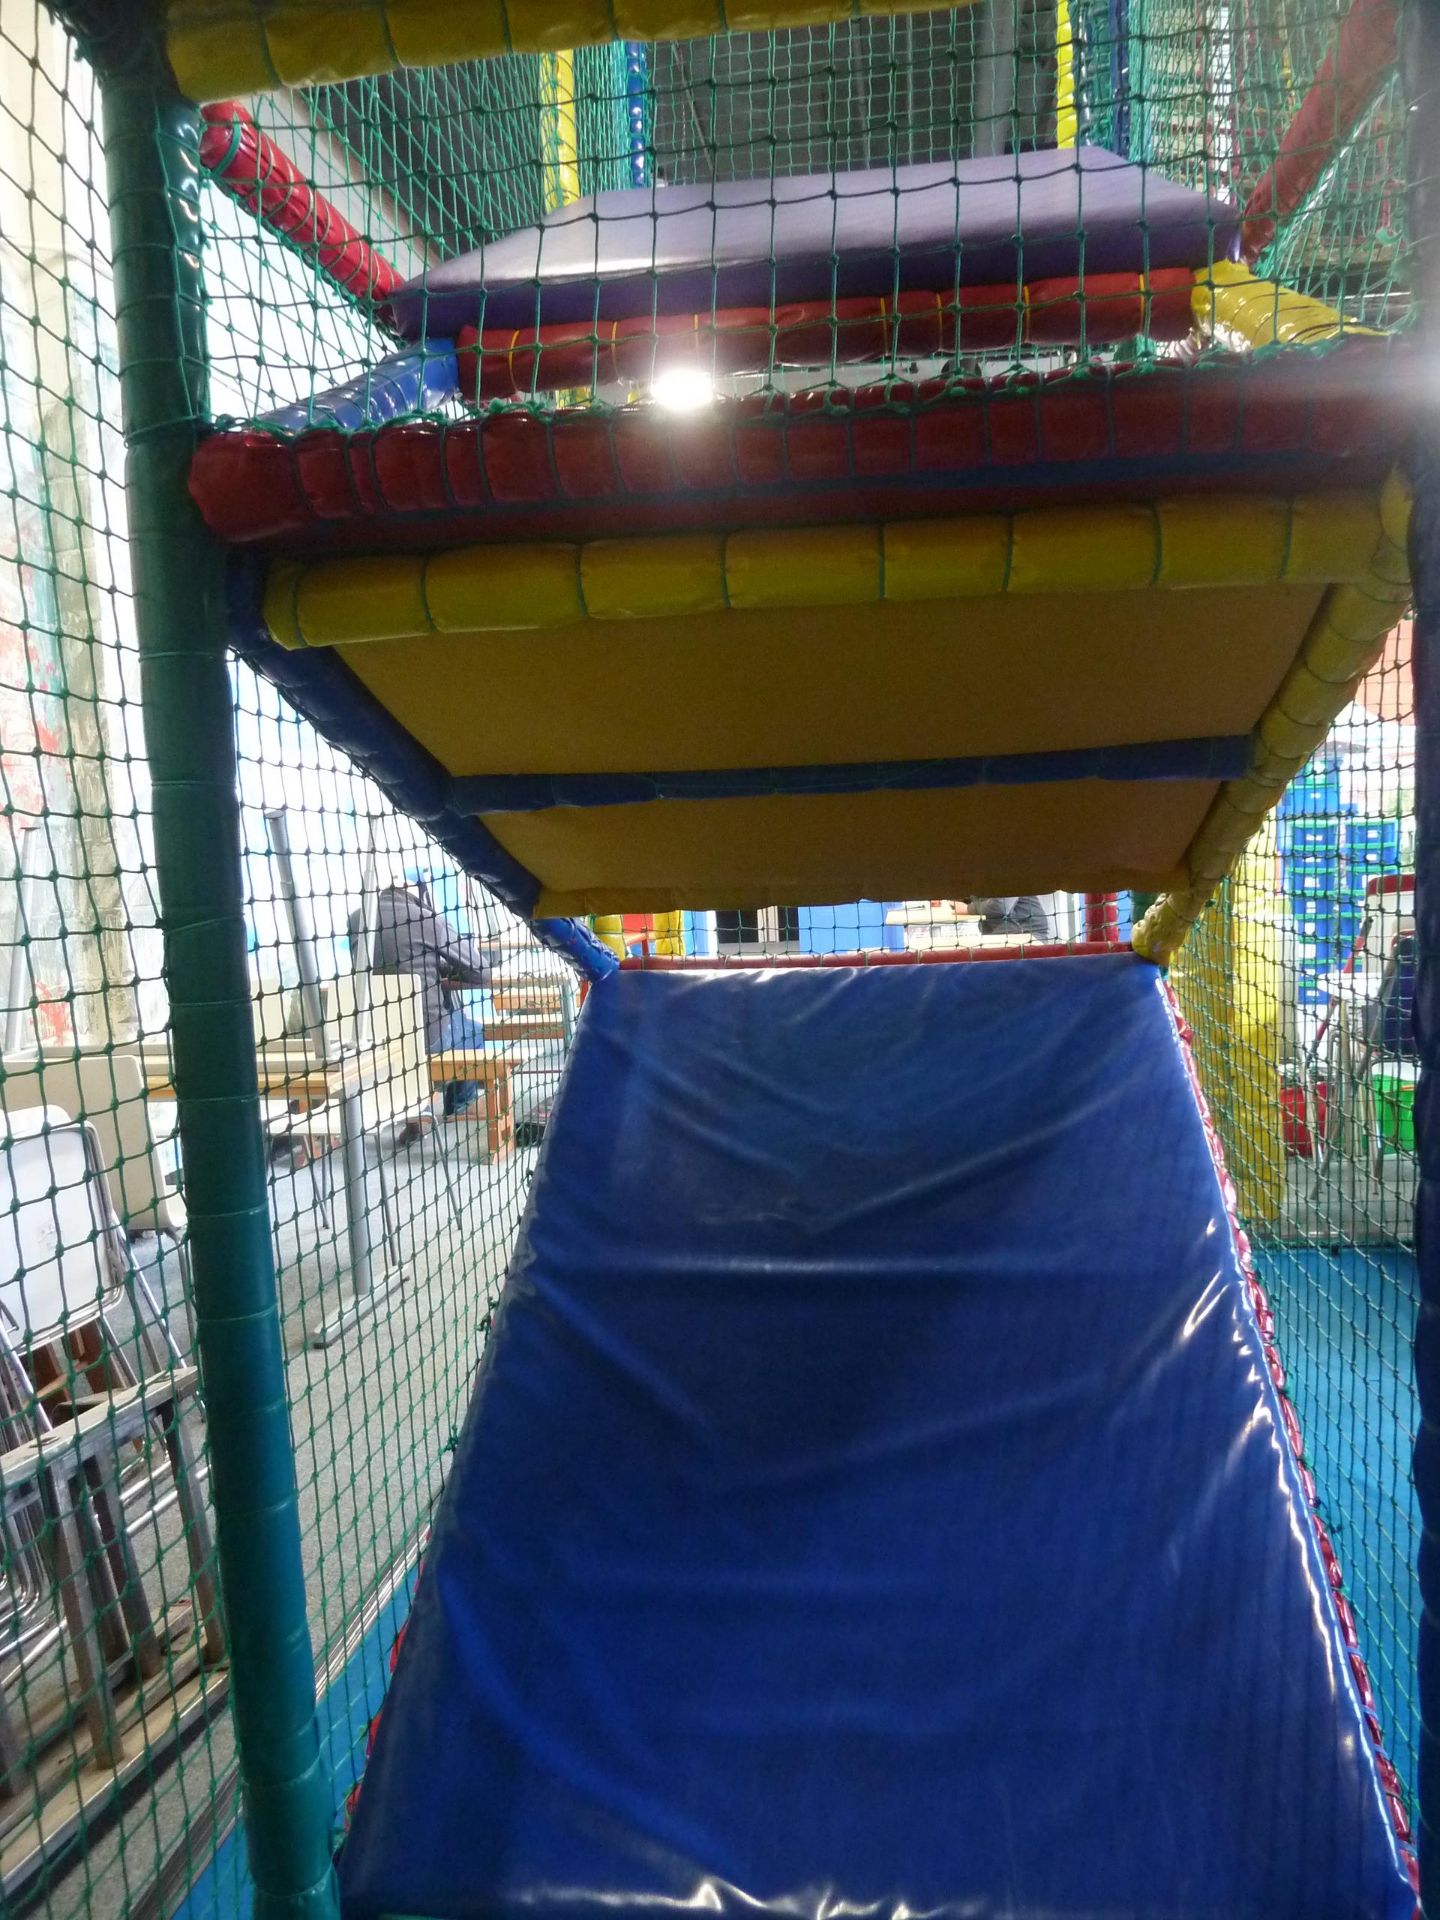 *Large soft play construction - 7.8m w x 5.8m d x 4.2m h. Constructed over two levels - Image 26 of 34